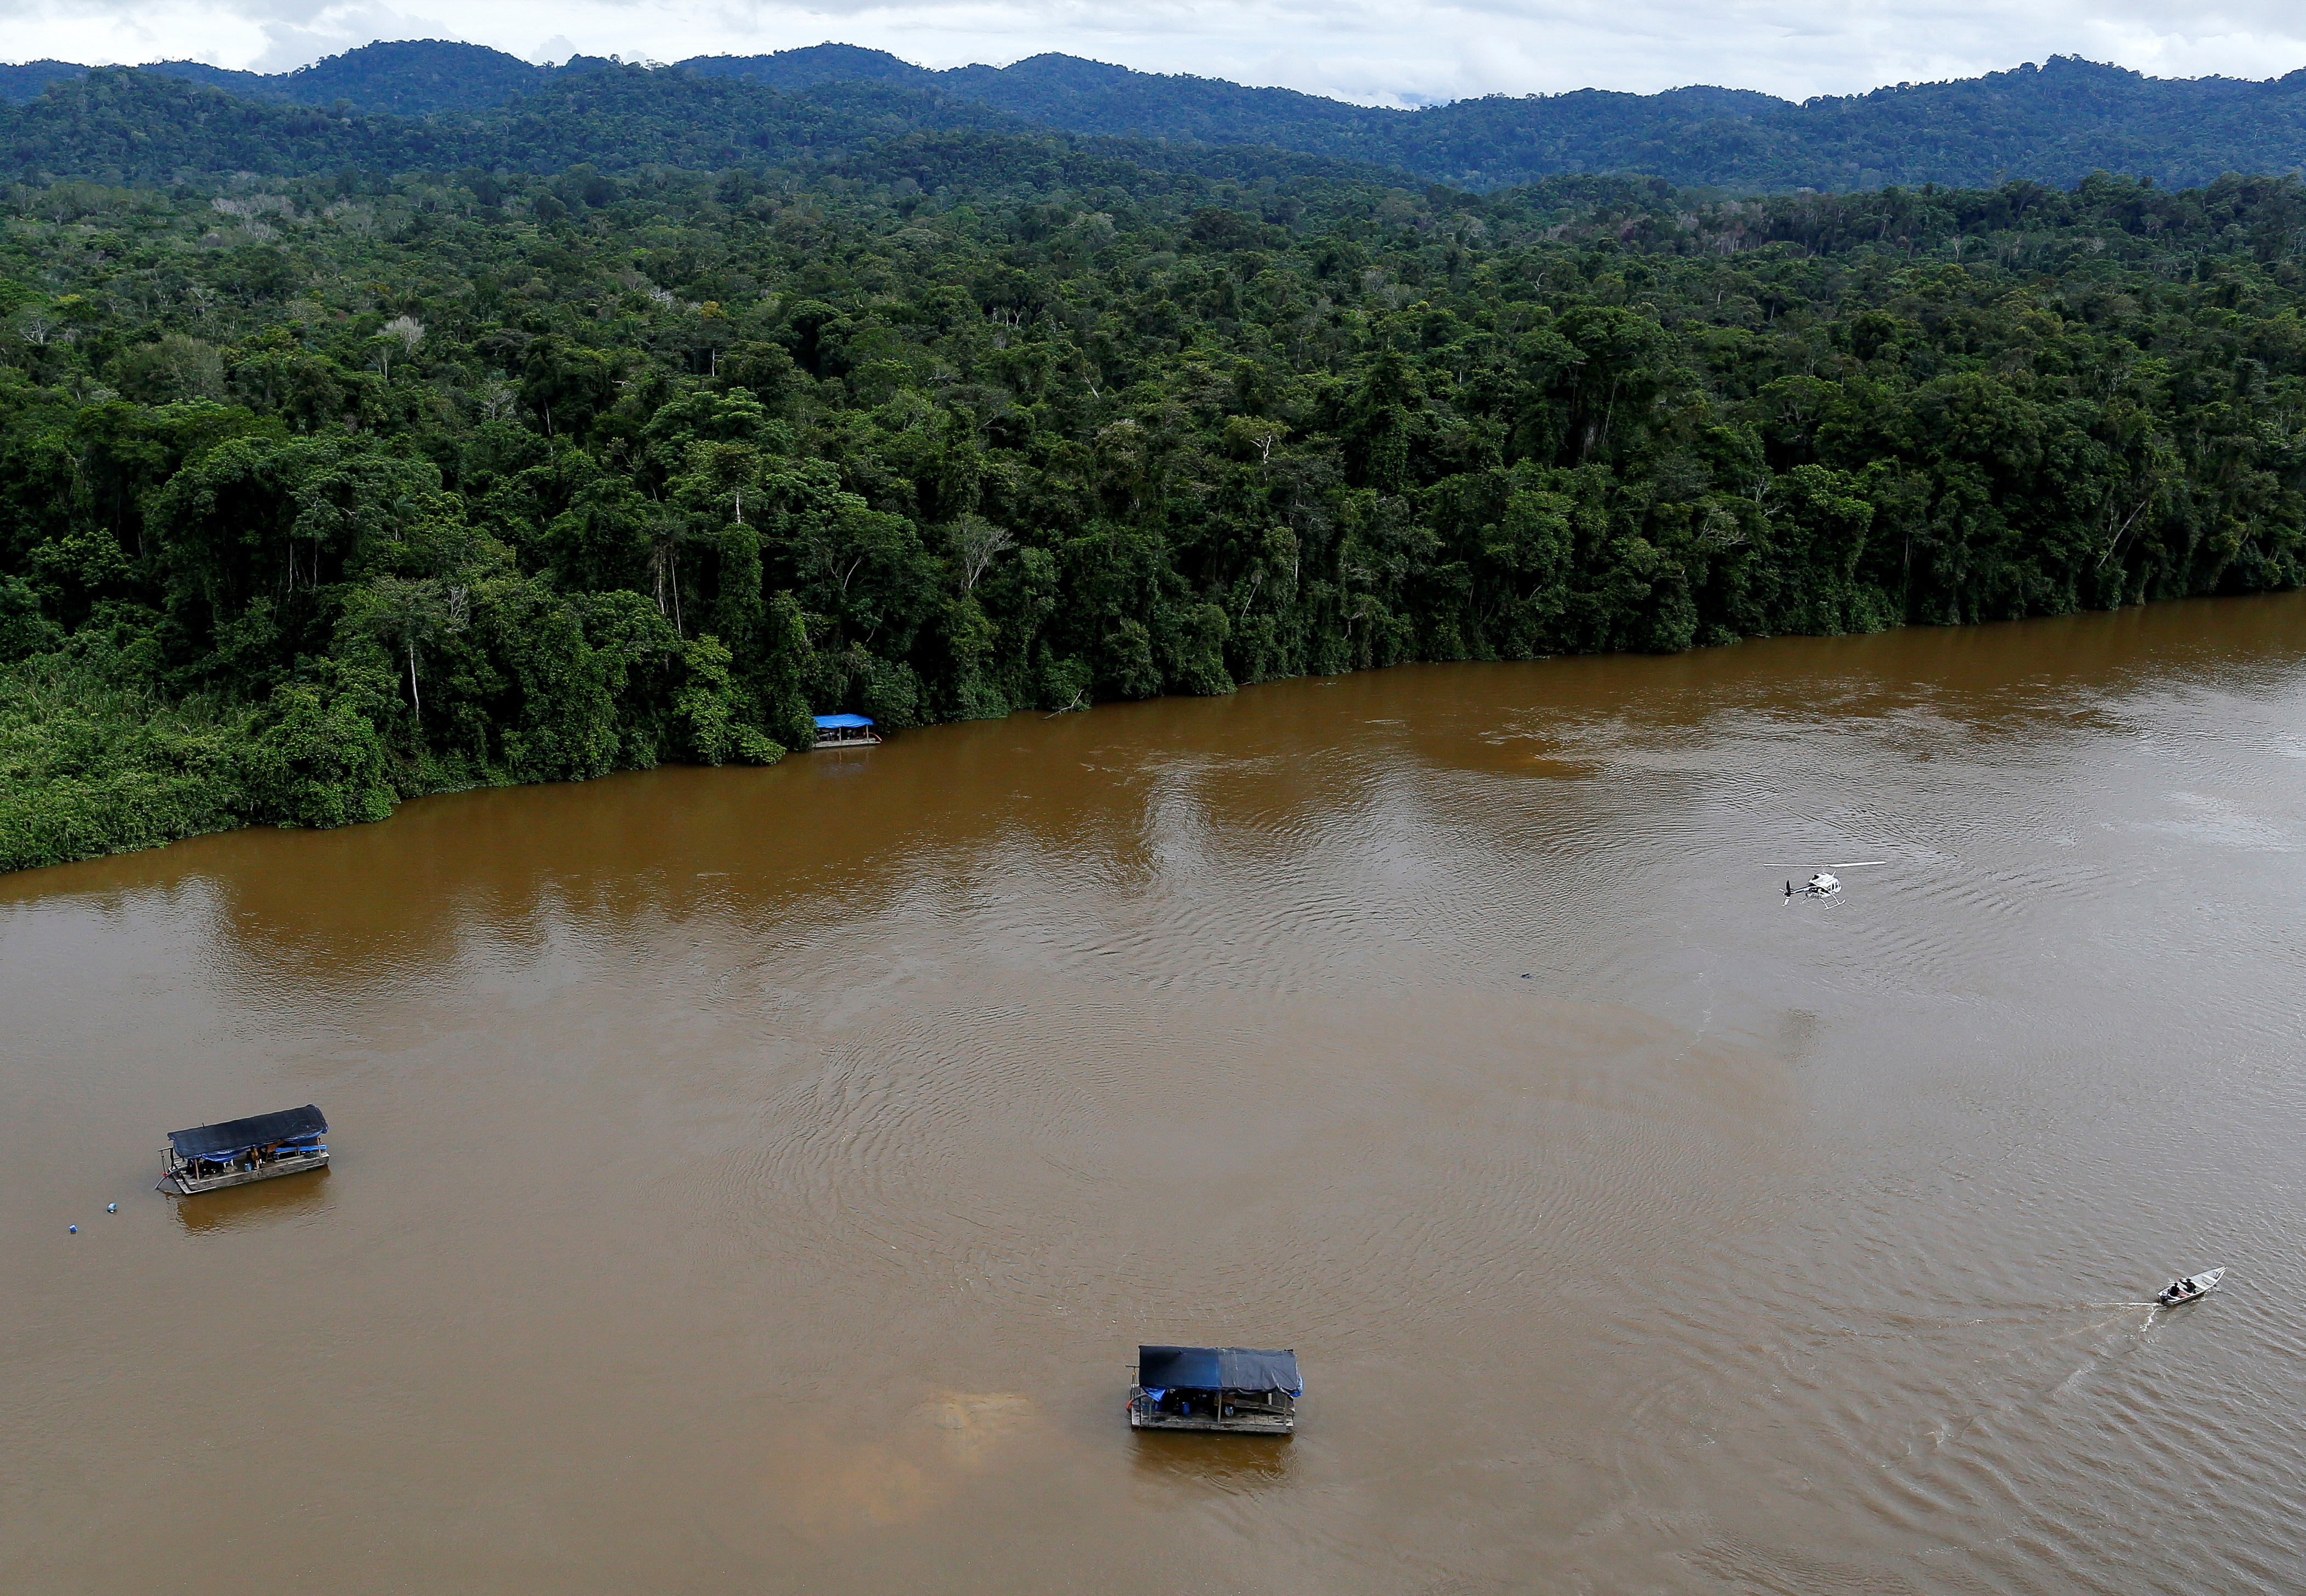 A gold dredge is seen at the banks of Uraricoera River during Brazil's environmental agency operation against illegal gold mining on indigenous land, in the heart of the Amazon rainforest